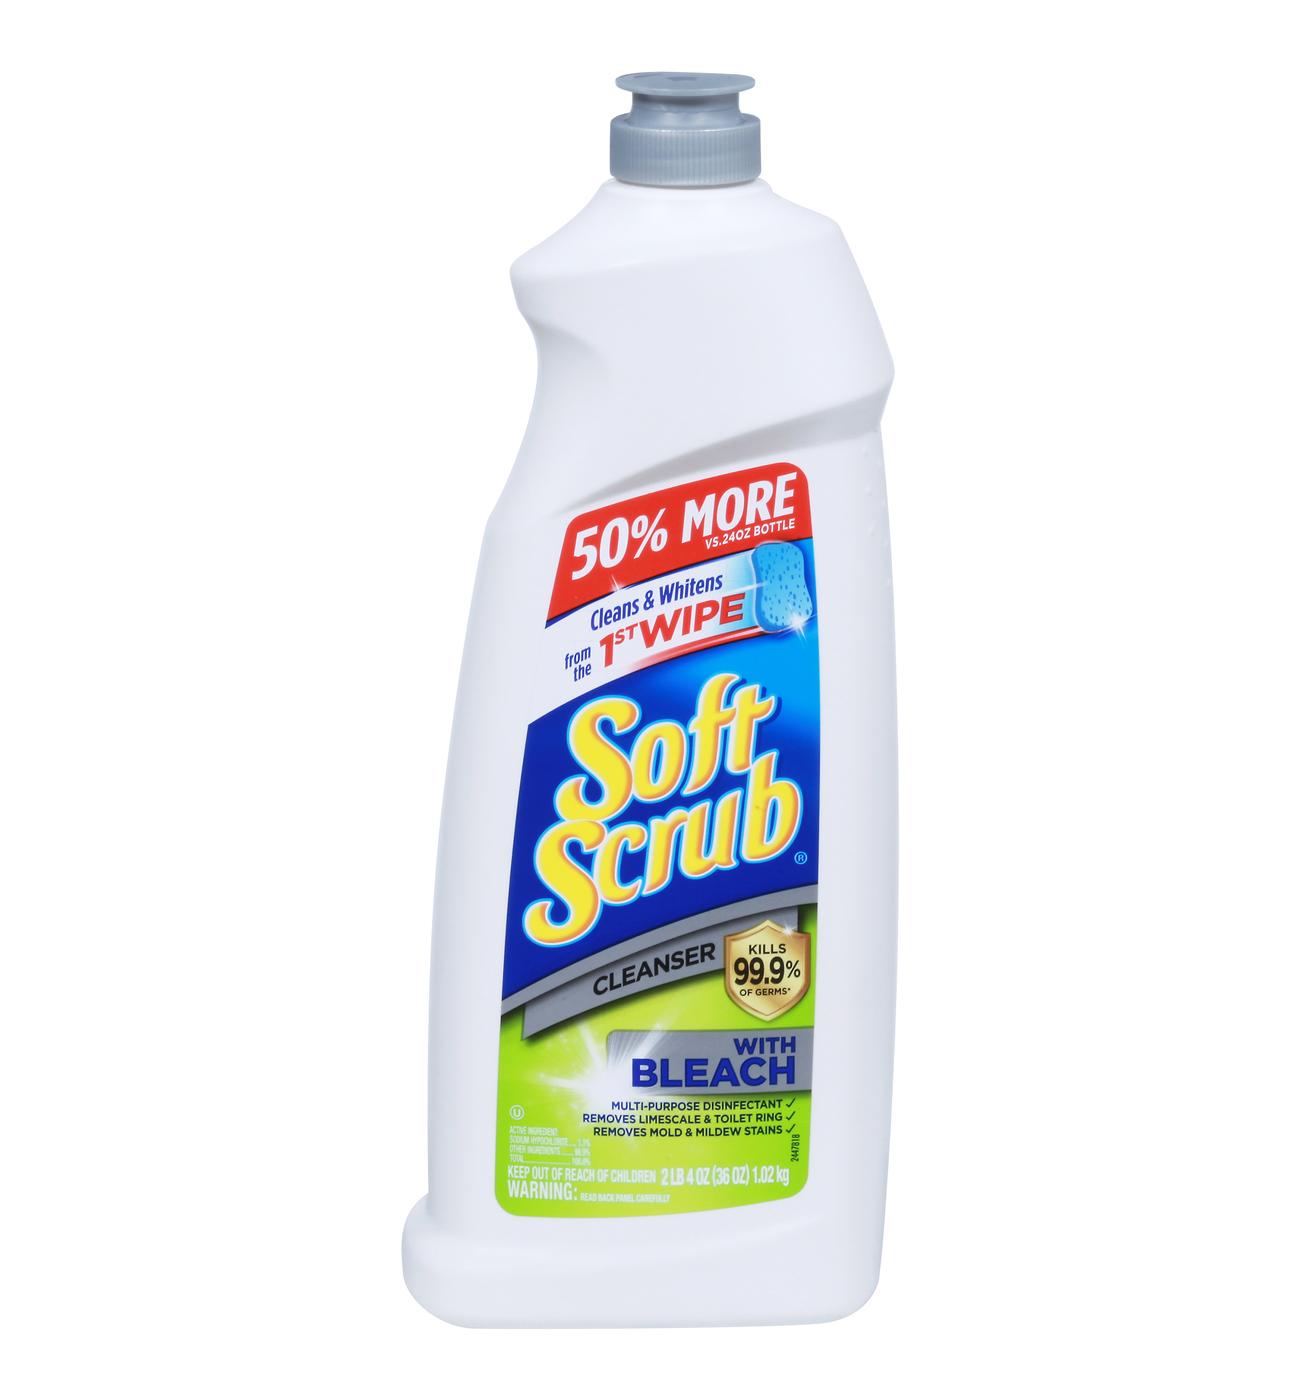 Soft Scrub Cleanser with Bleach; image 1 of 2